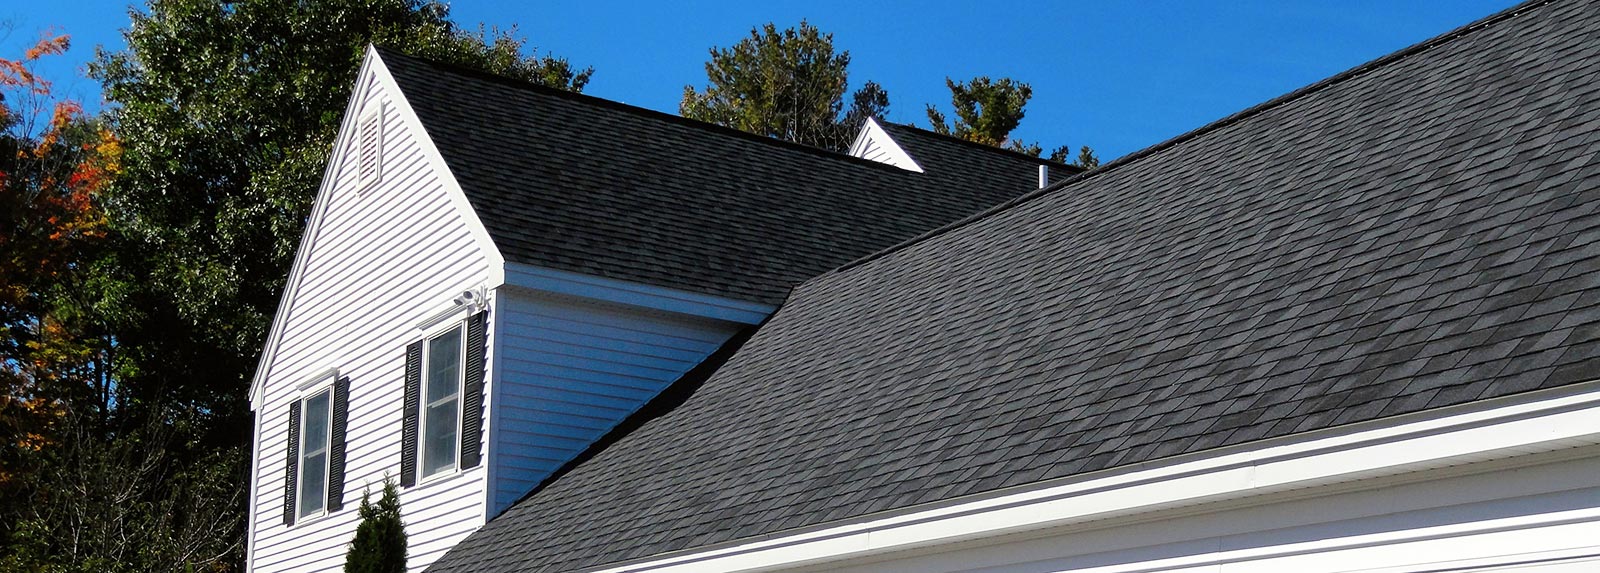 Certified roofing company in Concord, NH